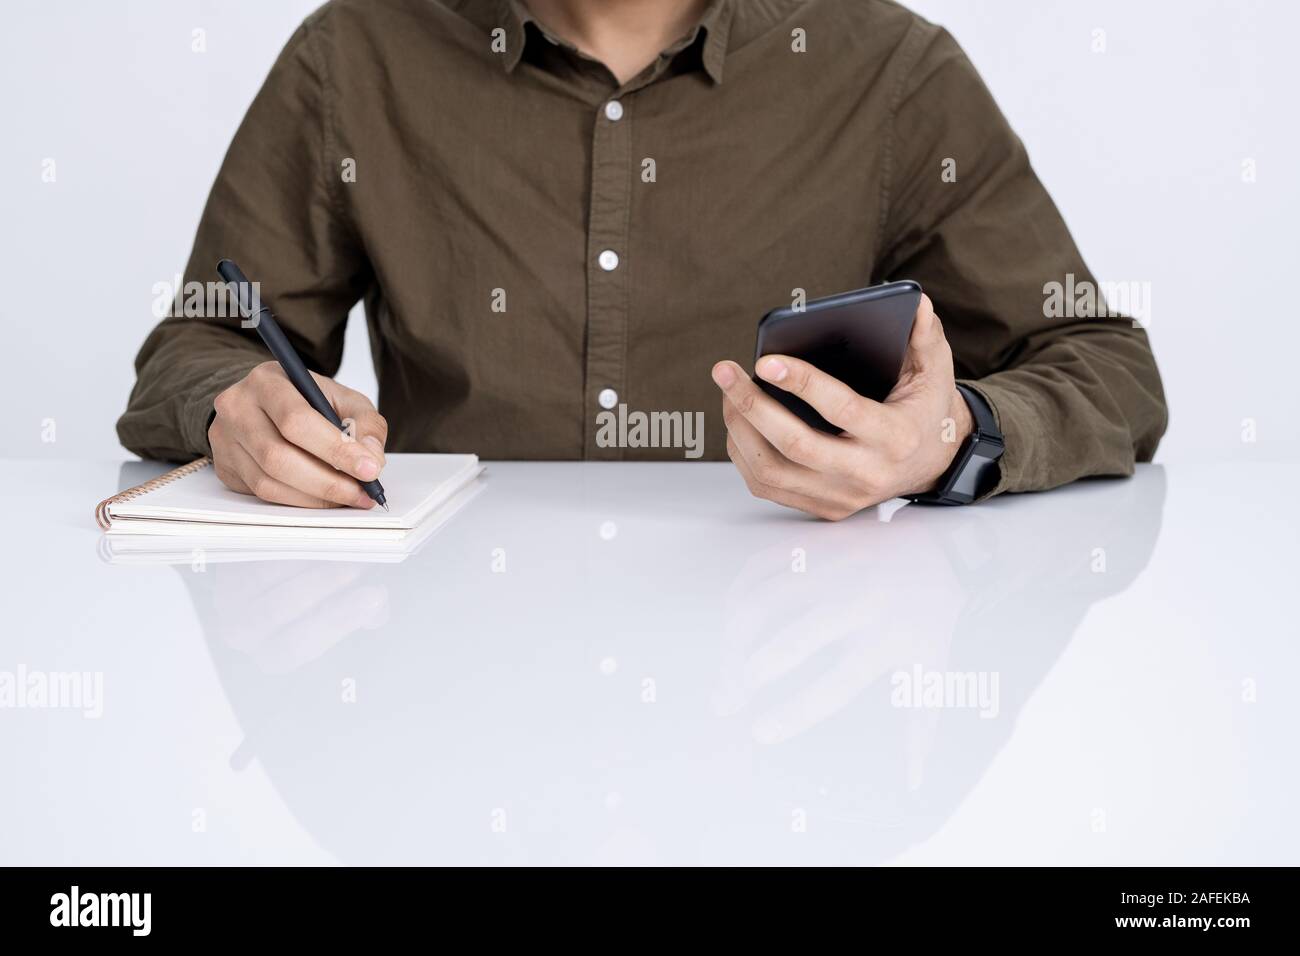 Hands of young businessman with smartphone and pen writing down working plan Stock Photo